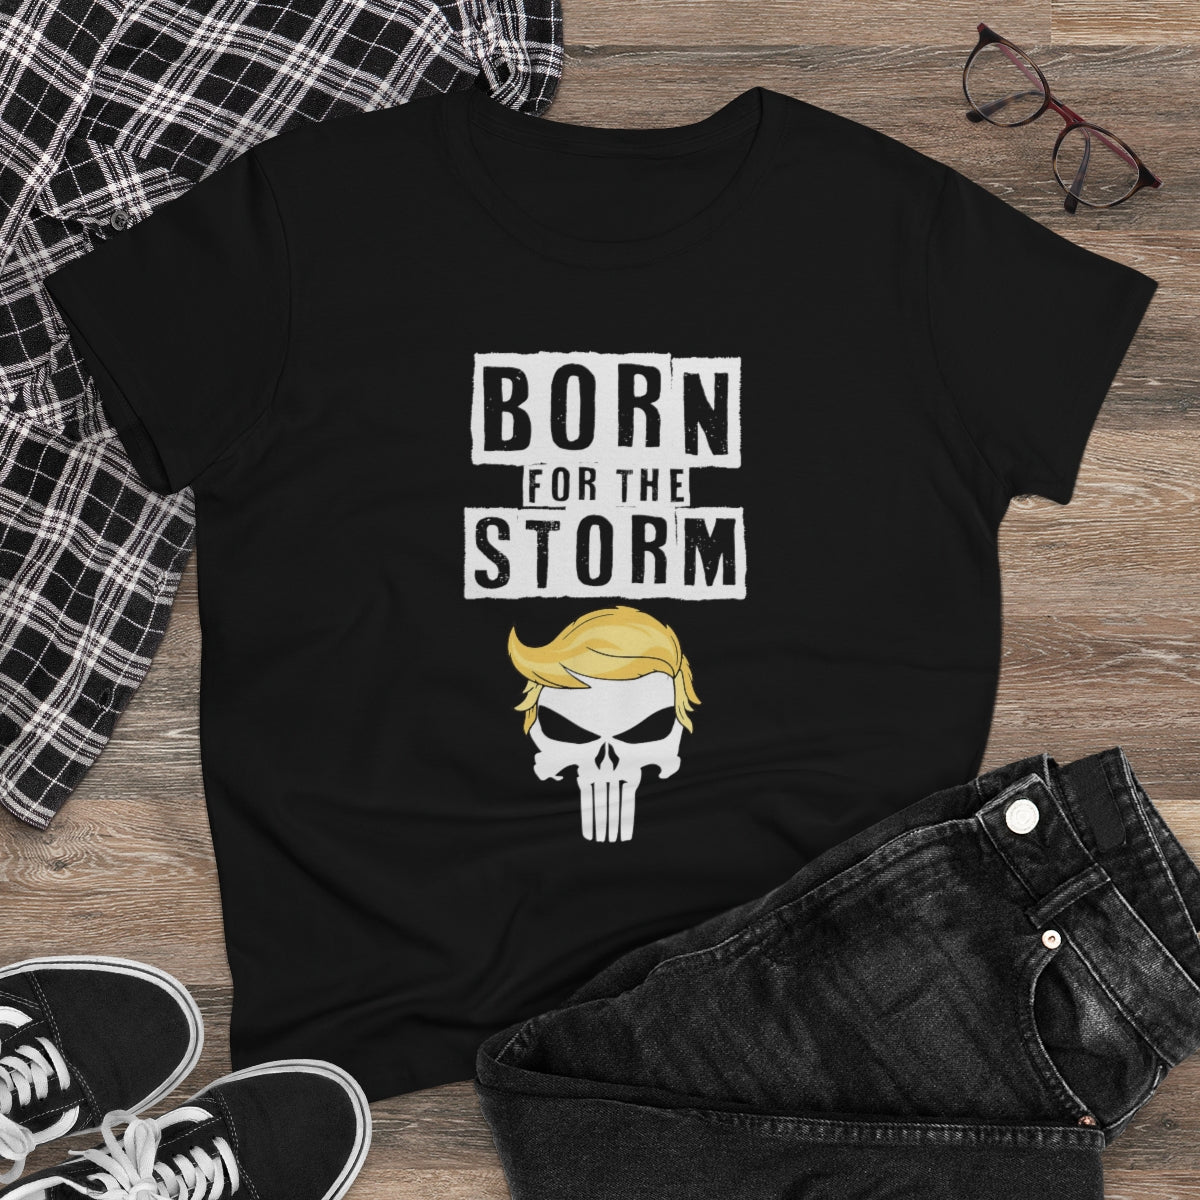 Born For The Storm | Women's Cotton Tee - Rise of The New Media